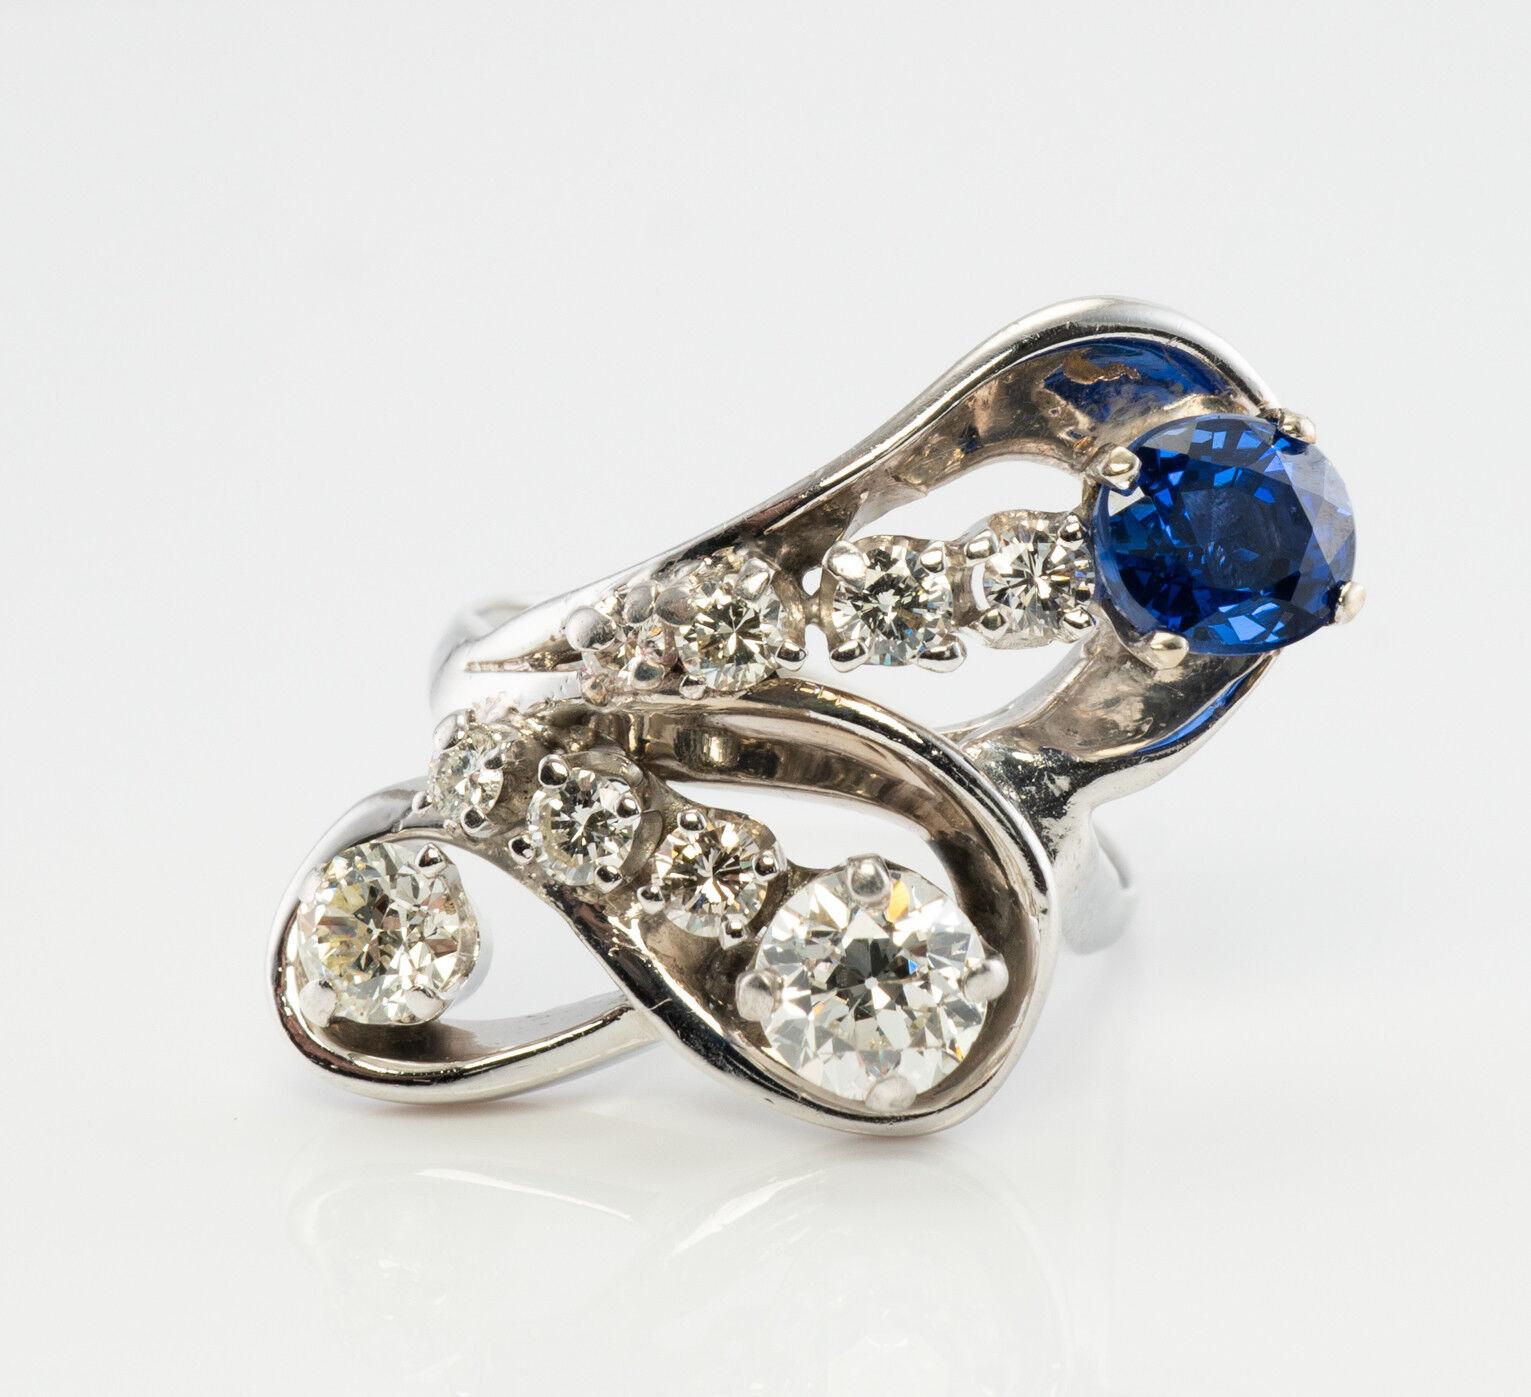 This dramatic vintage sapphire and diamond ring is crafted in solid 14K White gold (carefully tested and guaranteed). The oval cut high-quality Earth-mined Sapphire measures 6mm x 5mm (.80 carat), and this is a very clean and transparent gem of